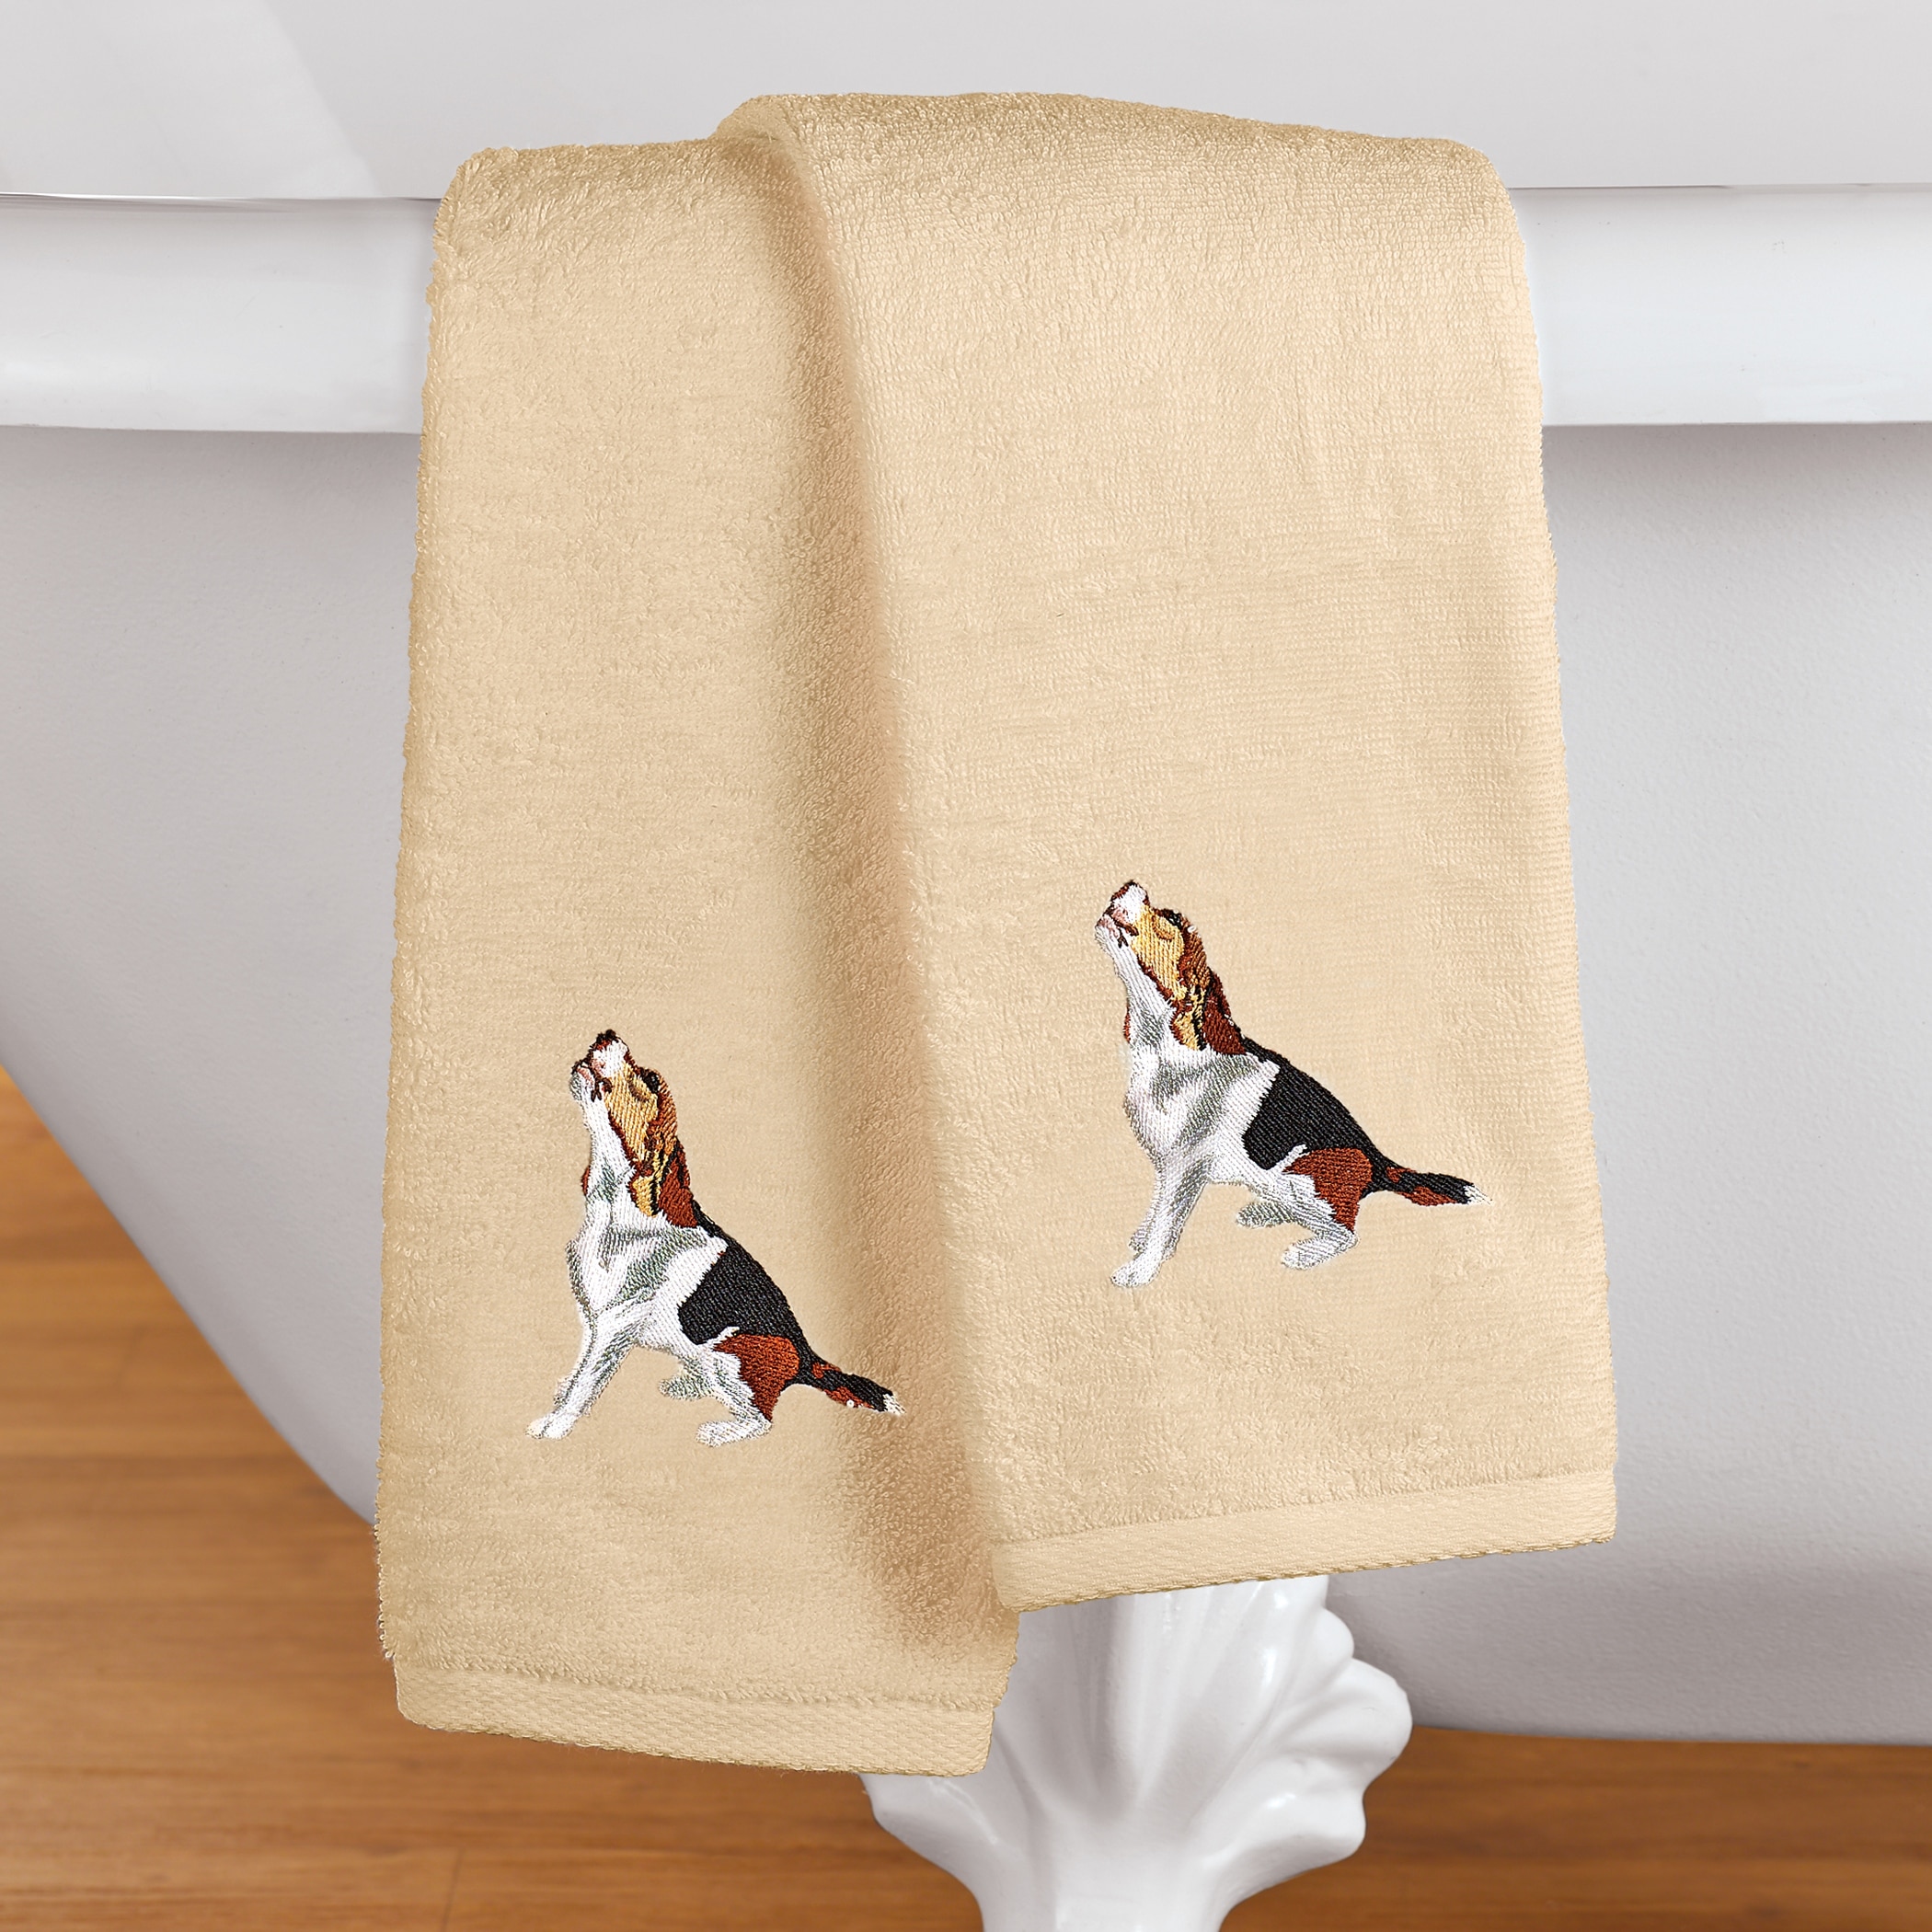 https://ak1.ostkcdn.com/images/products/is/images/direct/8b2f962d1ba1dd78a186eb19e7b151ba4b889d84/Dogs-Embroidered-Cotton-Hand-Towels-Set-of-2.jpg